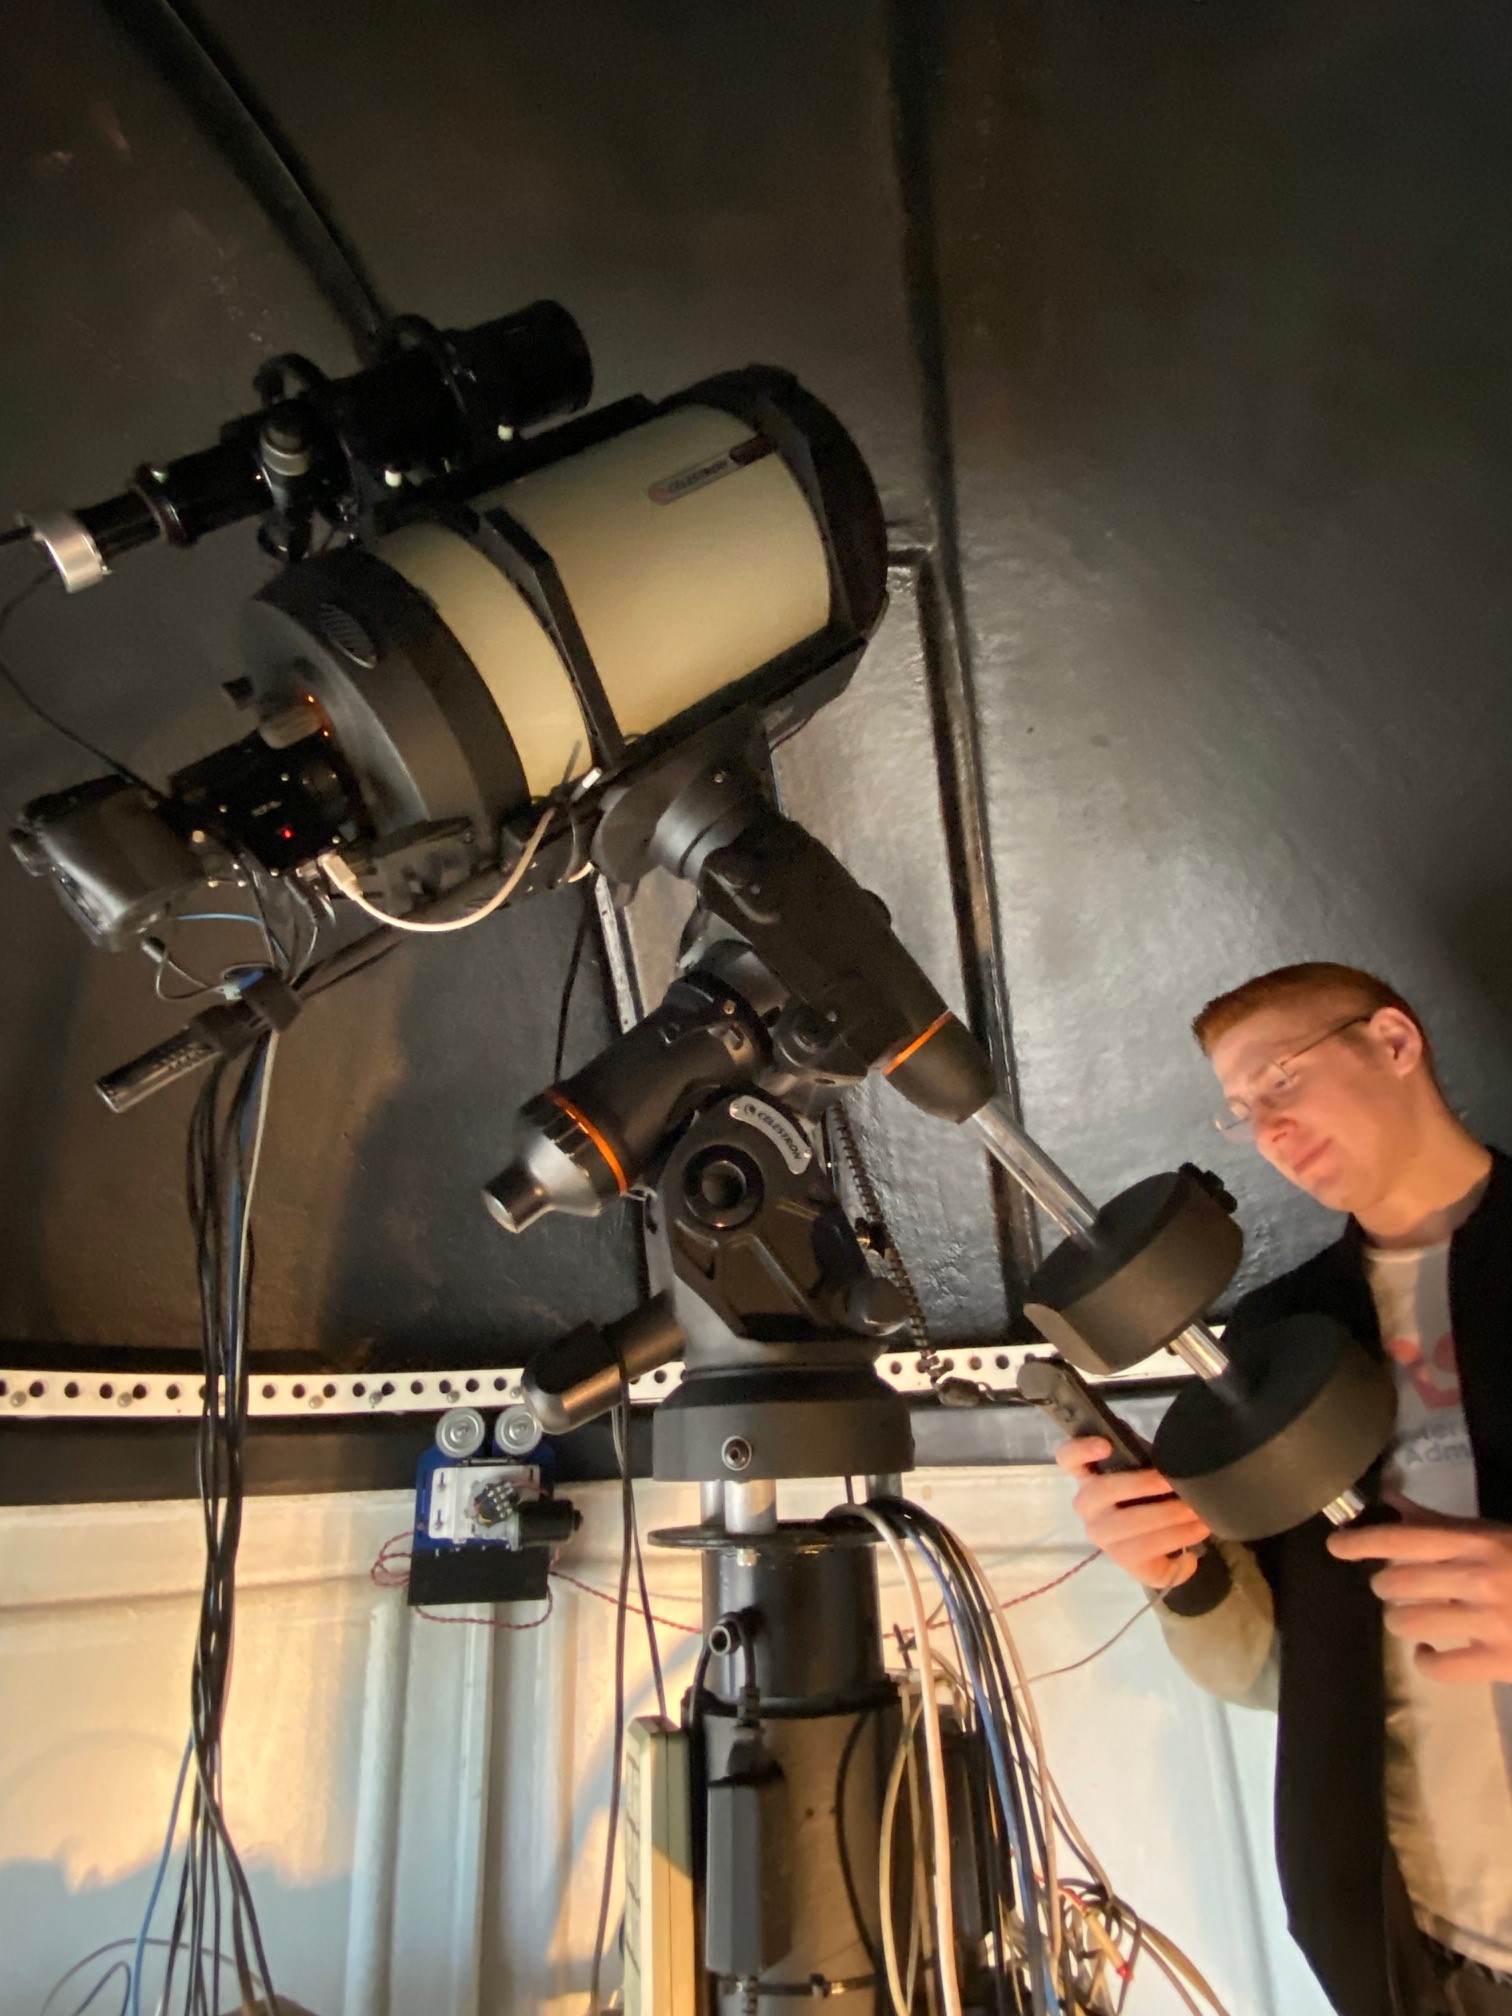     Astronomy Club President Miles Mercier works with the 9.25" imaging telescope inside the Sherzer Secondary Observatory.